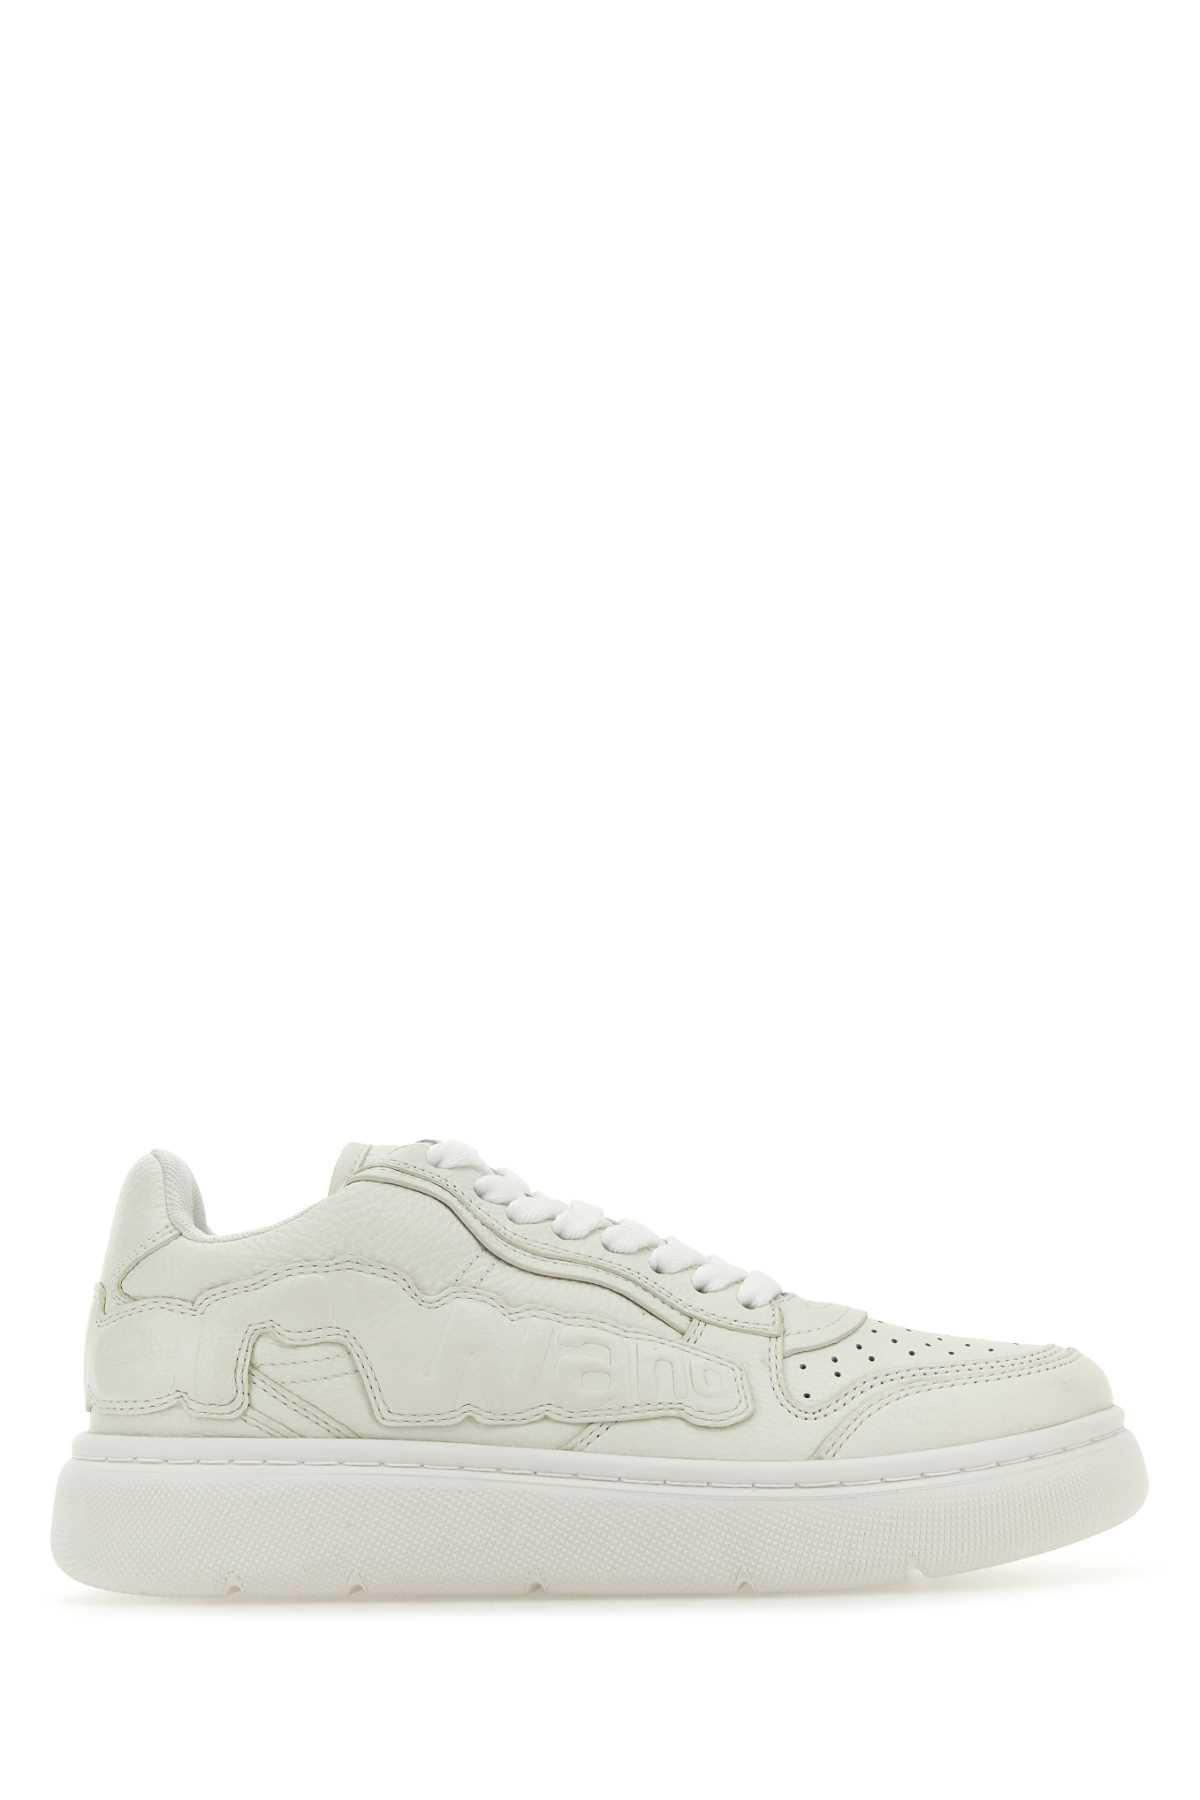 Alexander Wang White Leather Puff Sneakers